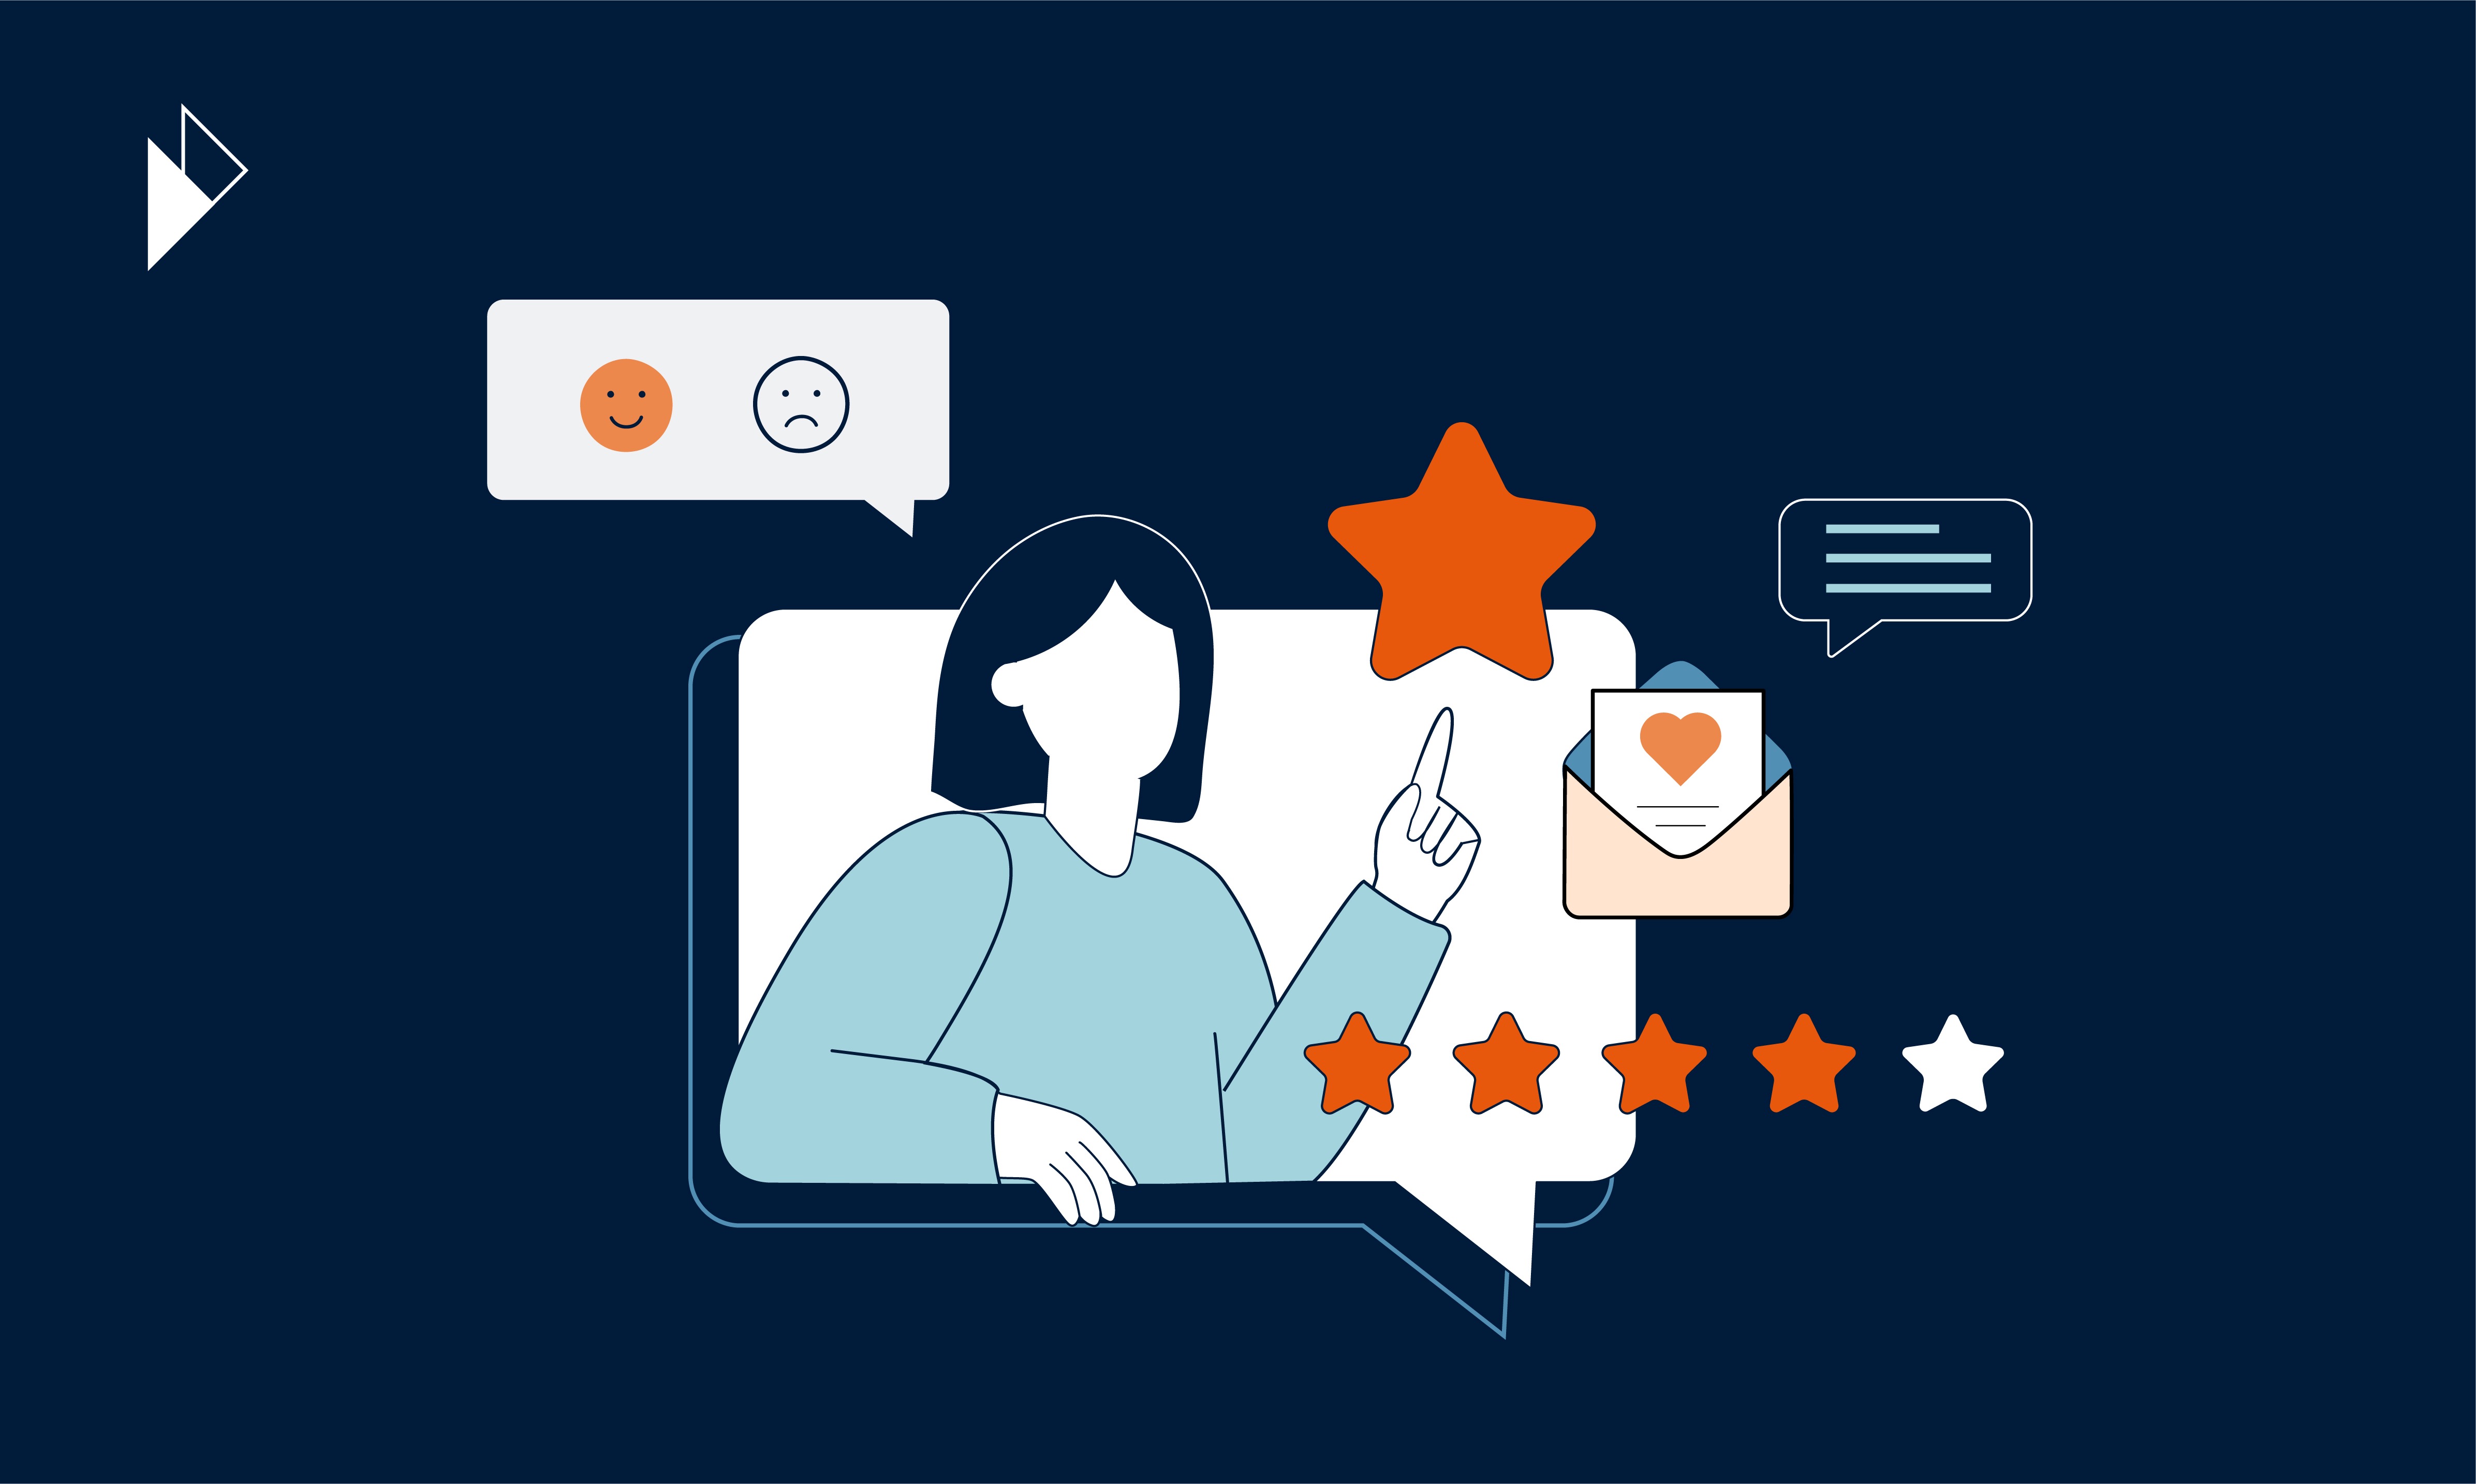 Parcel Perform's RATE feature helps e-commerce business figure out what customers want, and areas for improvement. Image shows abstract image of woman pointing at a star, and rating her delivery experience with notifications. 